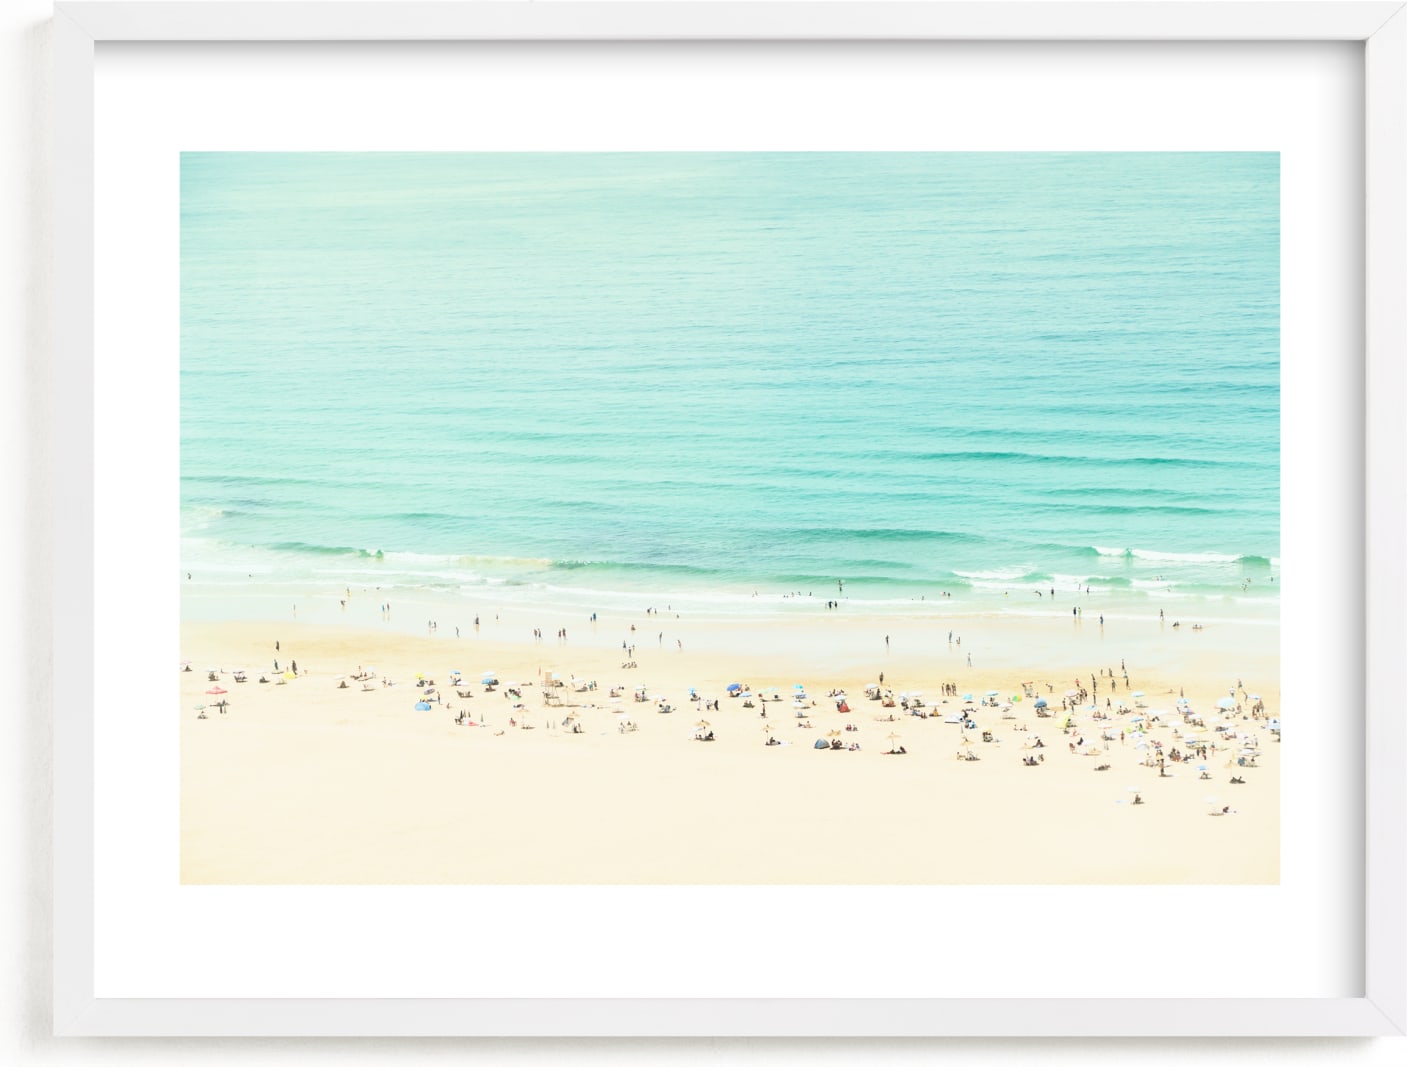 This is a blue kids wall art by Jacquelyn Sloane Siklos called Remembering a day by the Sea.